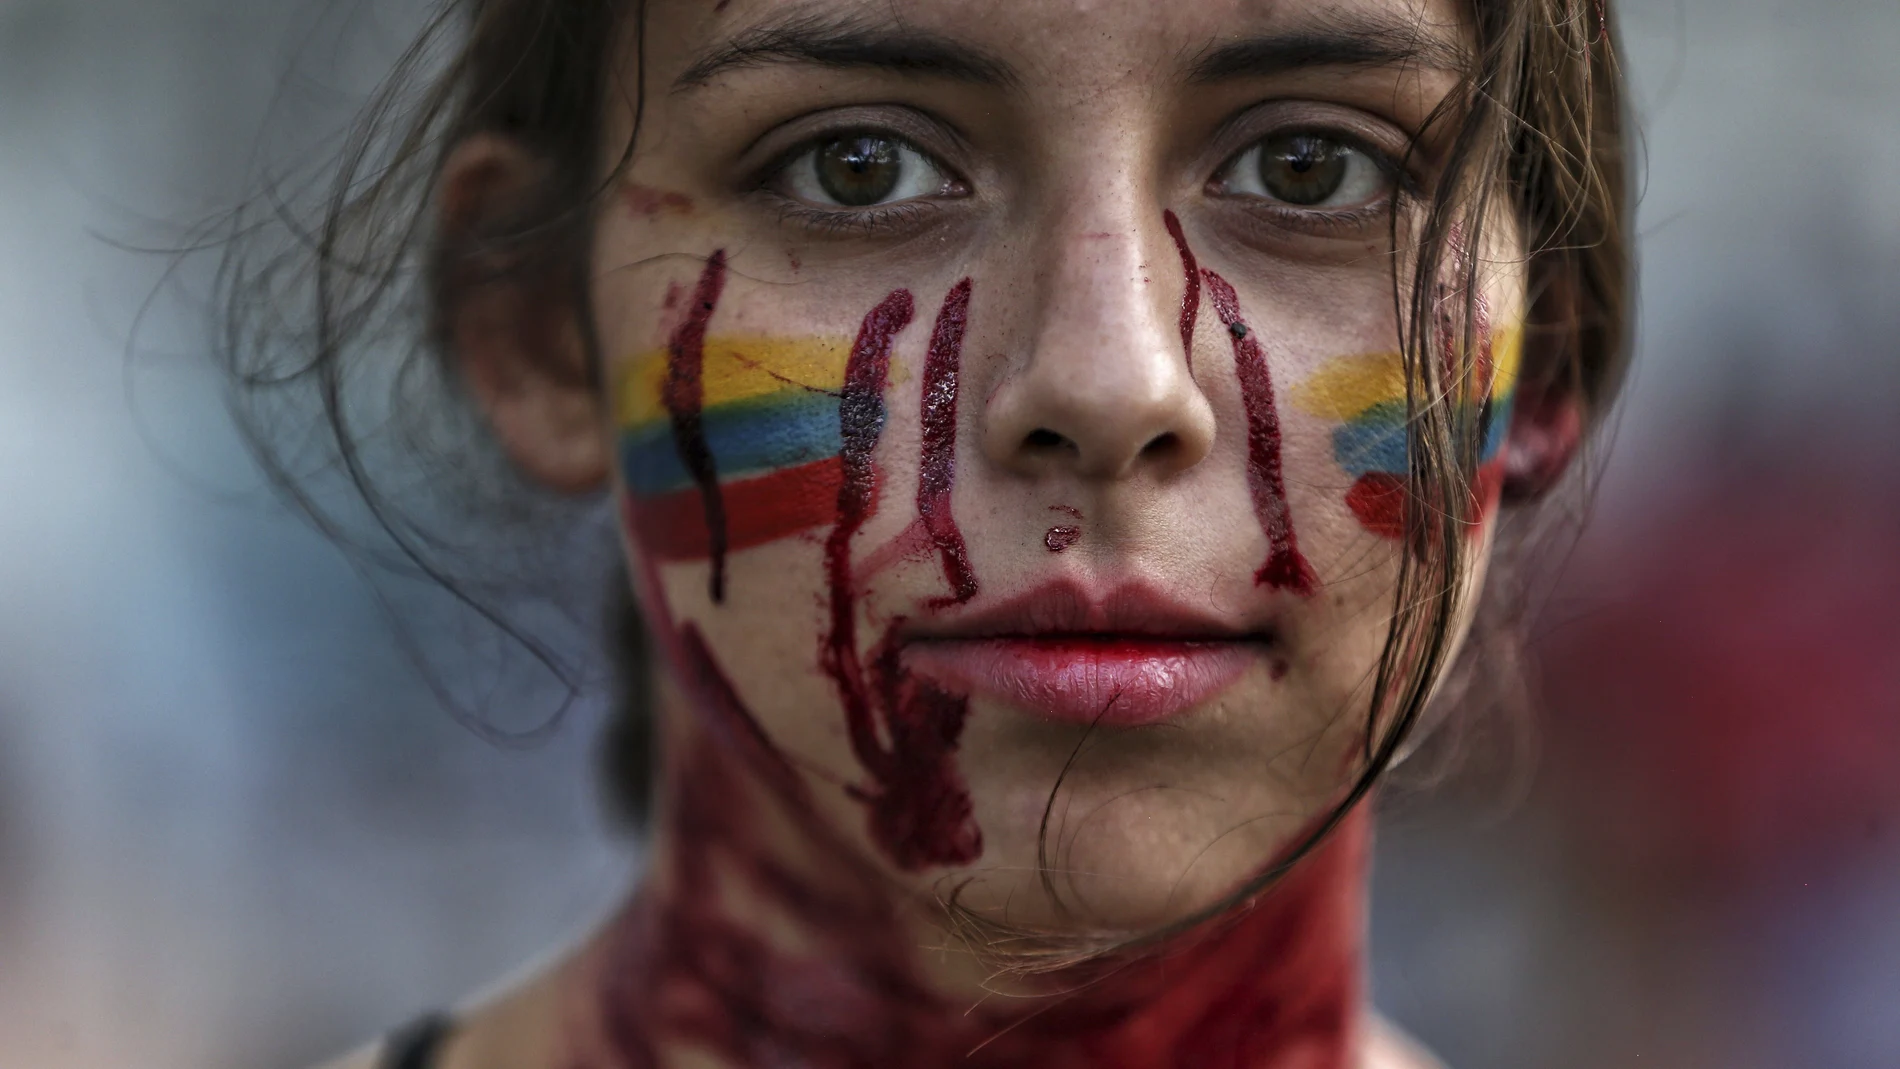 A student performs a play called "Who killed them" during anti-government protests in Cali, Colombia, Tuesday, May 11, 2021. Colombians have protested across the country against a government they feel has long ignored their needs, allowed corruption to run rampant and is so out of touch that it proposed tax increases during the coronavirus pandemic. (AP Photo/Andres Gonzalez)